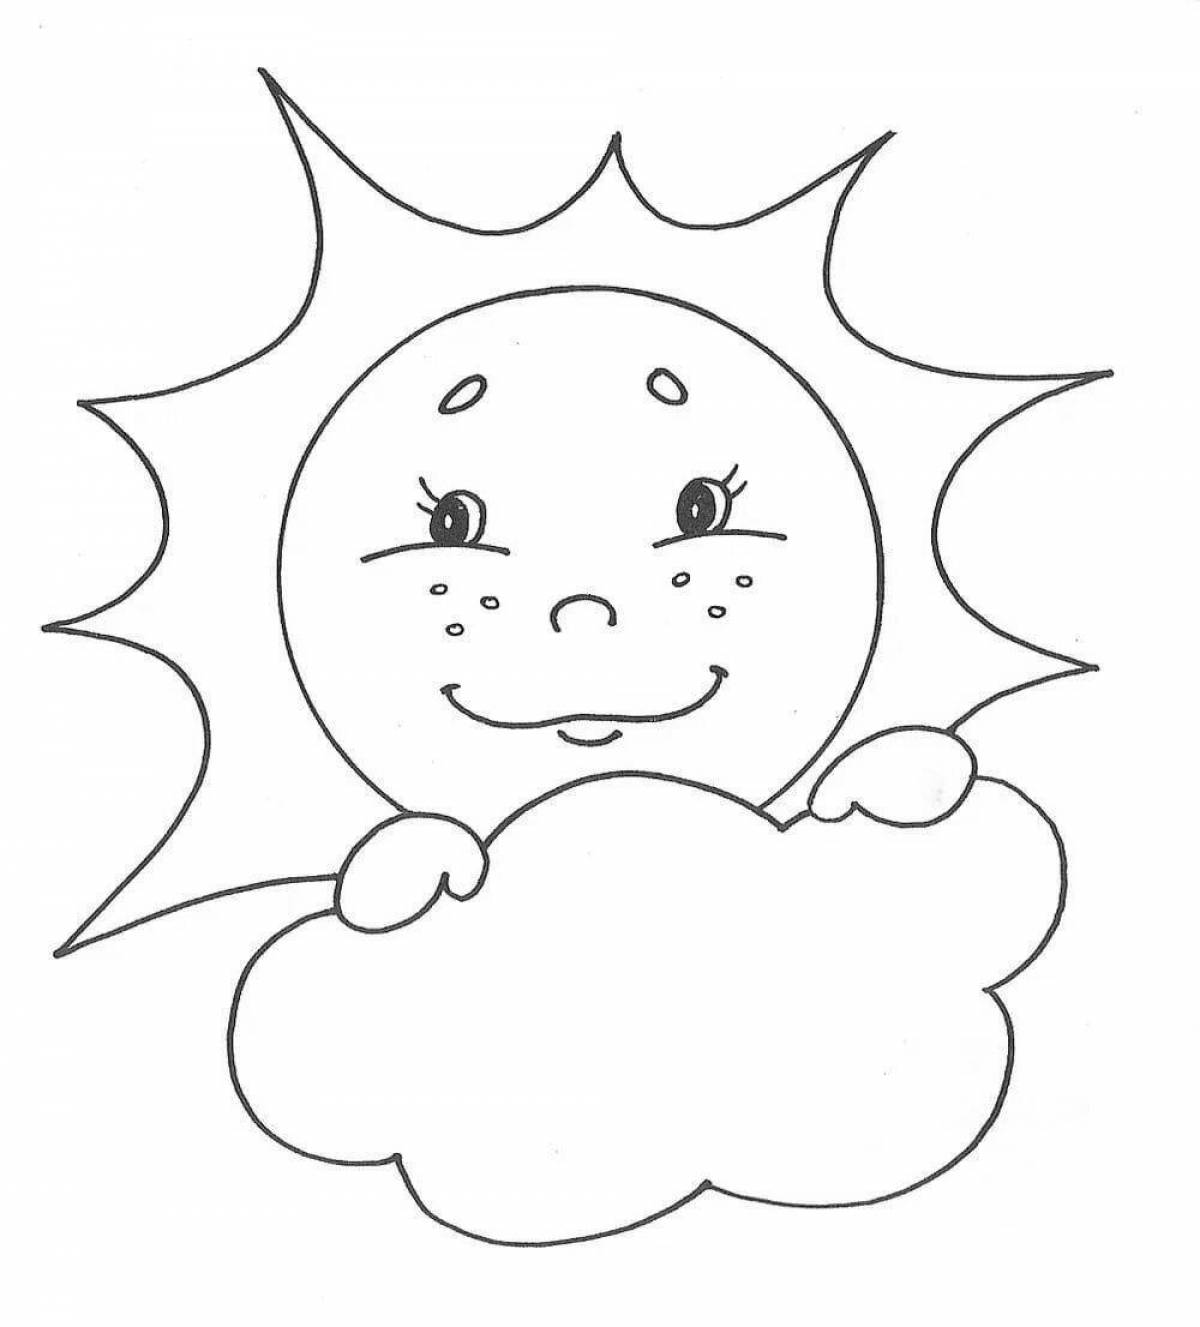 Glorious sun coloring book for 4-5 year olds